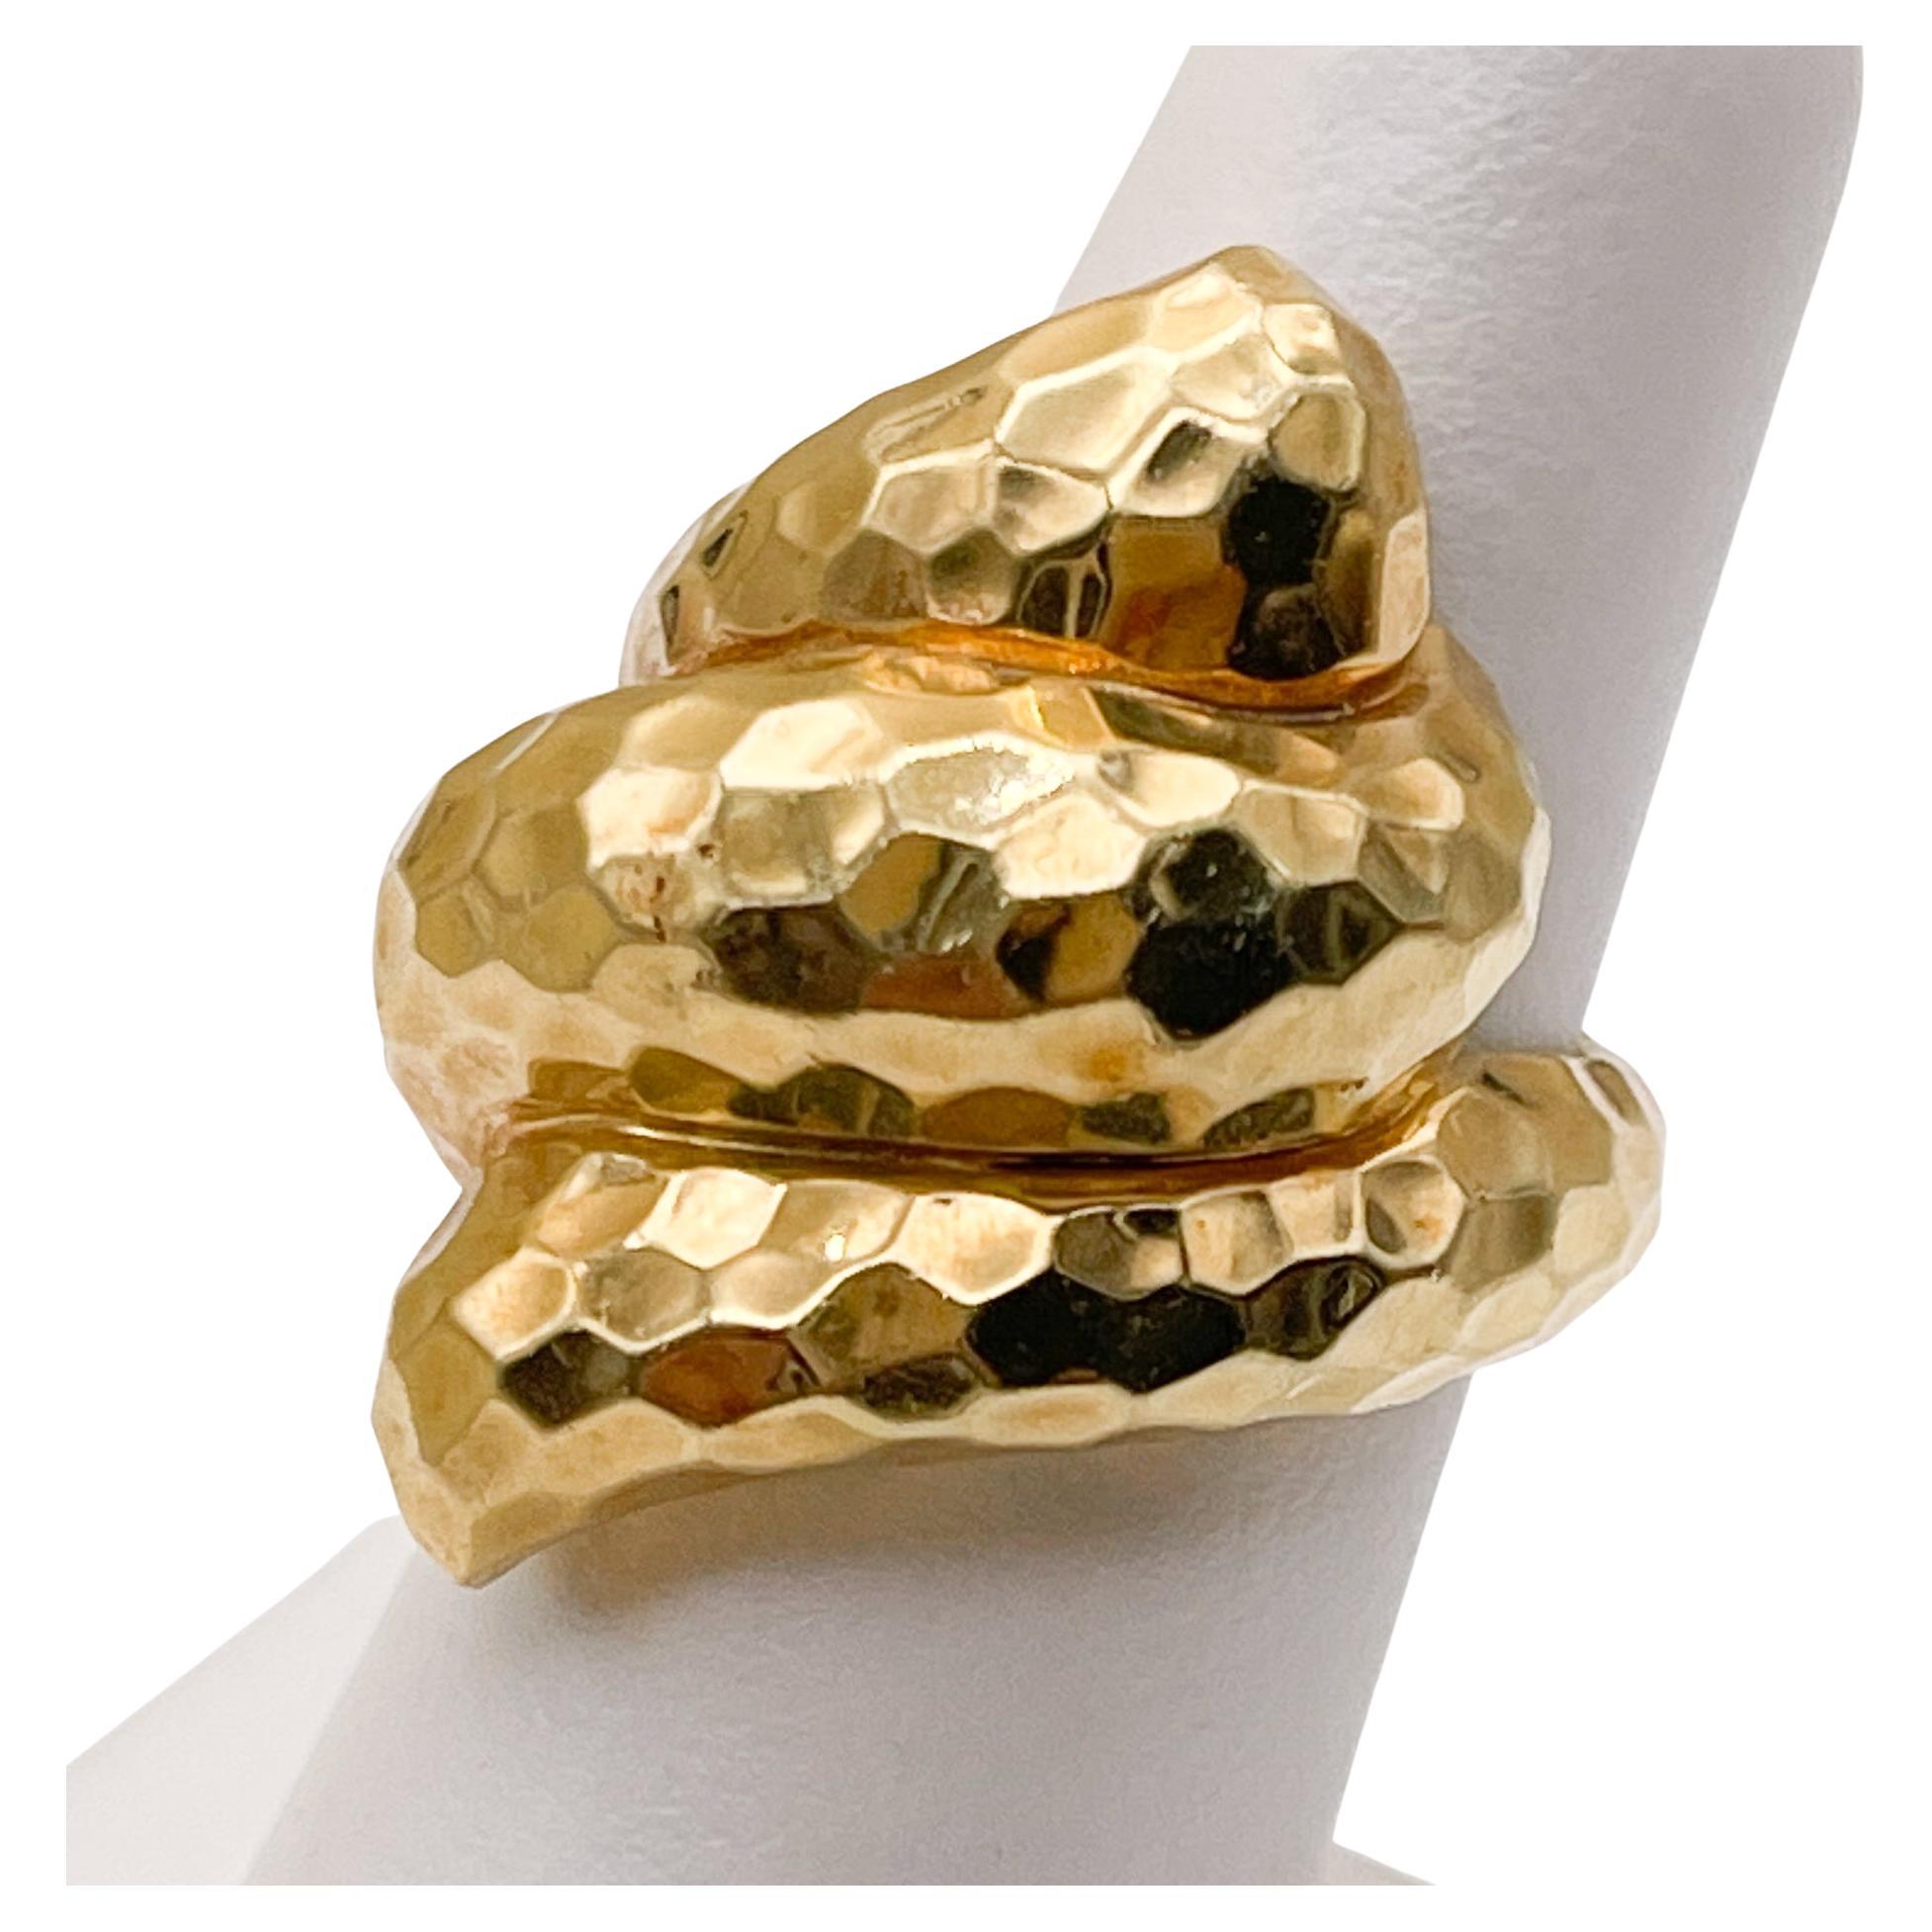 HENRY DUNAY 18K HAMMERED TWISTED RING

Now retired Henry Dunay is a world renown jewelry designer.
His vintage pieces are a great addition to anyones jewelry collection.
This ring is in great vintage condition.

18K Yellow Gold
Size: 6.5

Marks: